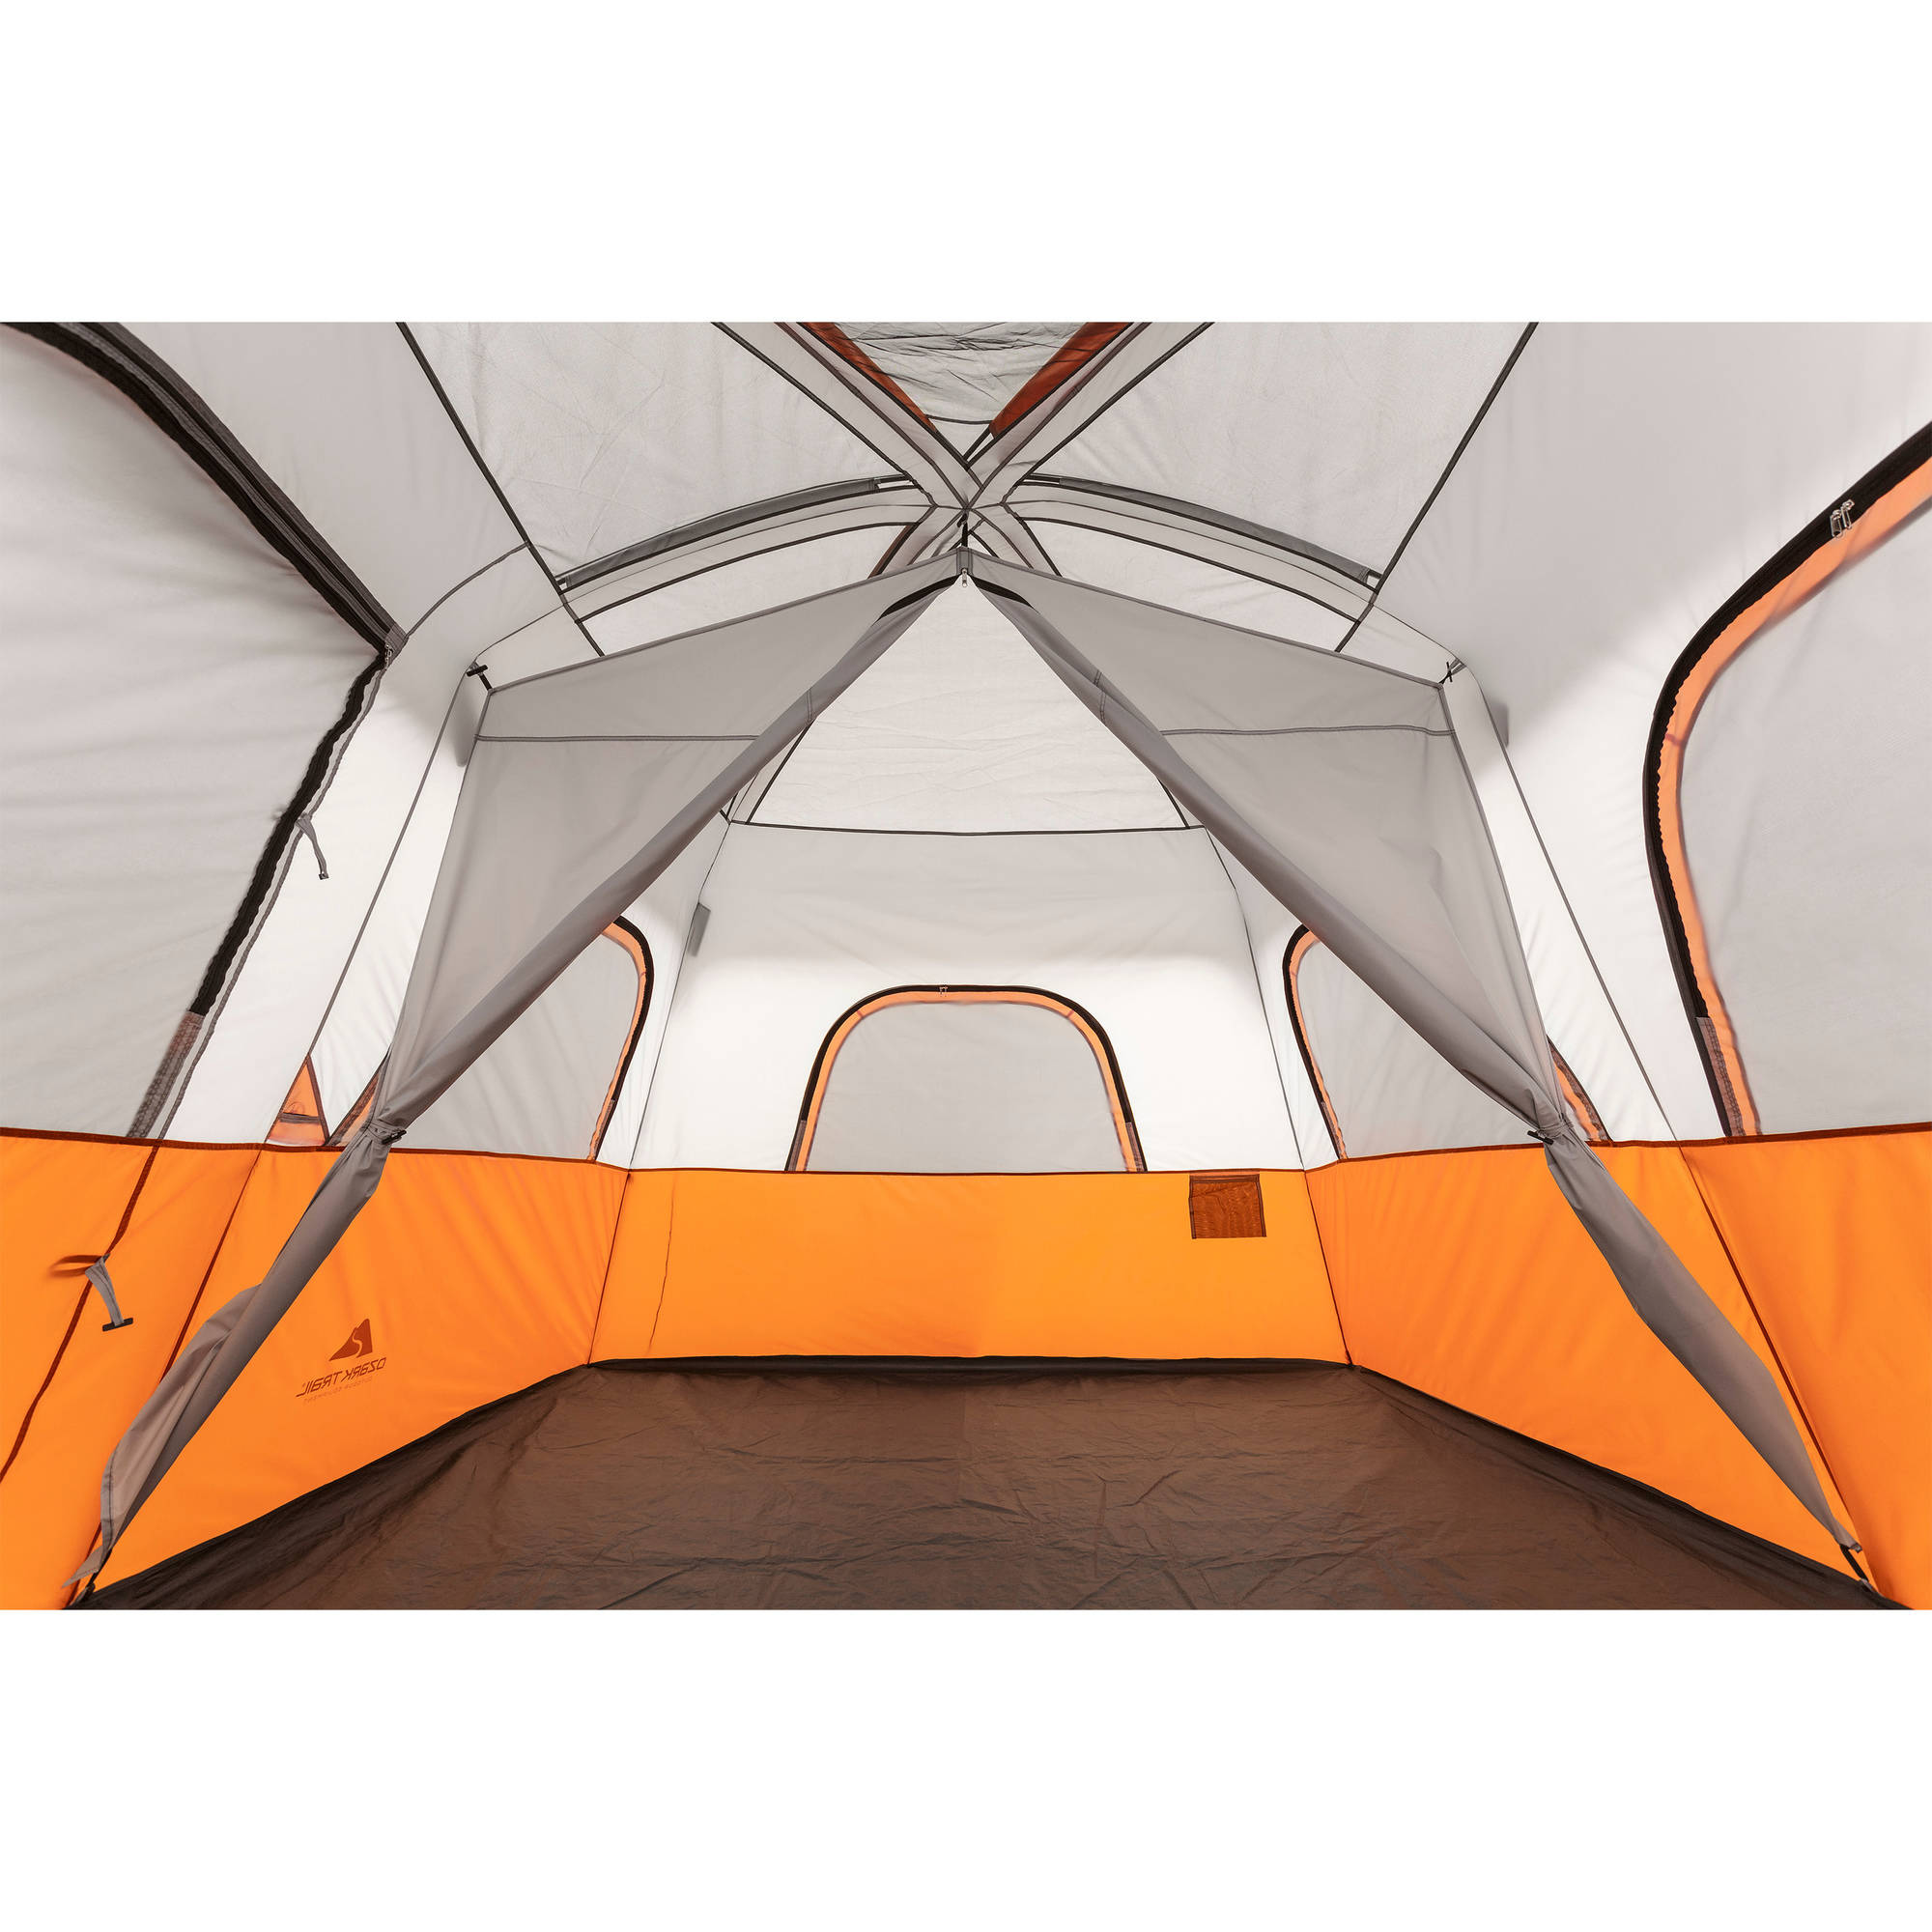 Ozark Trail 13' x 9' with 76"H Family Cabin Tent, Sleeps 8 - image 3 of 8